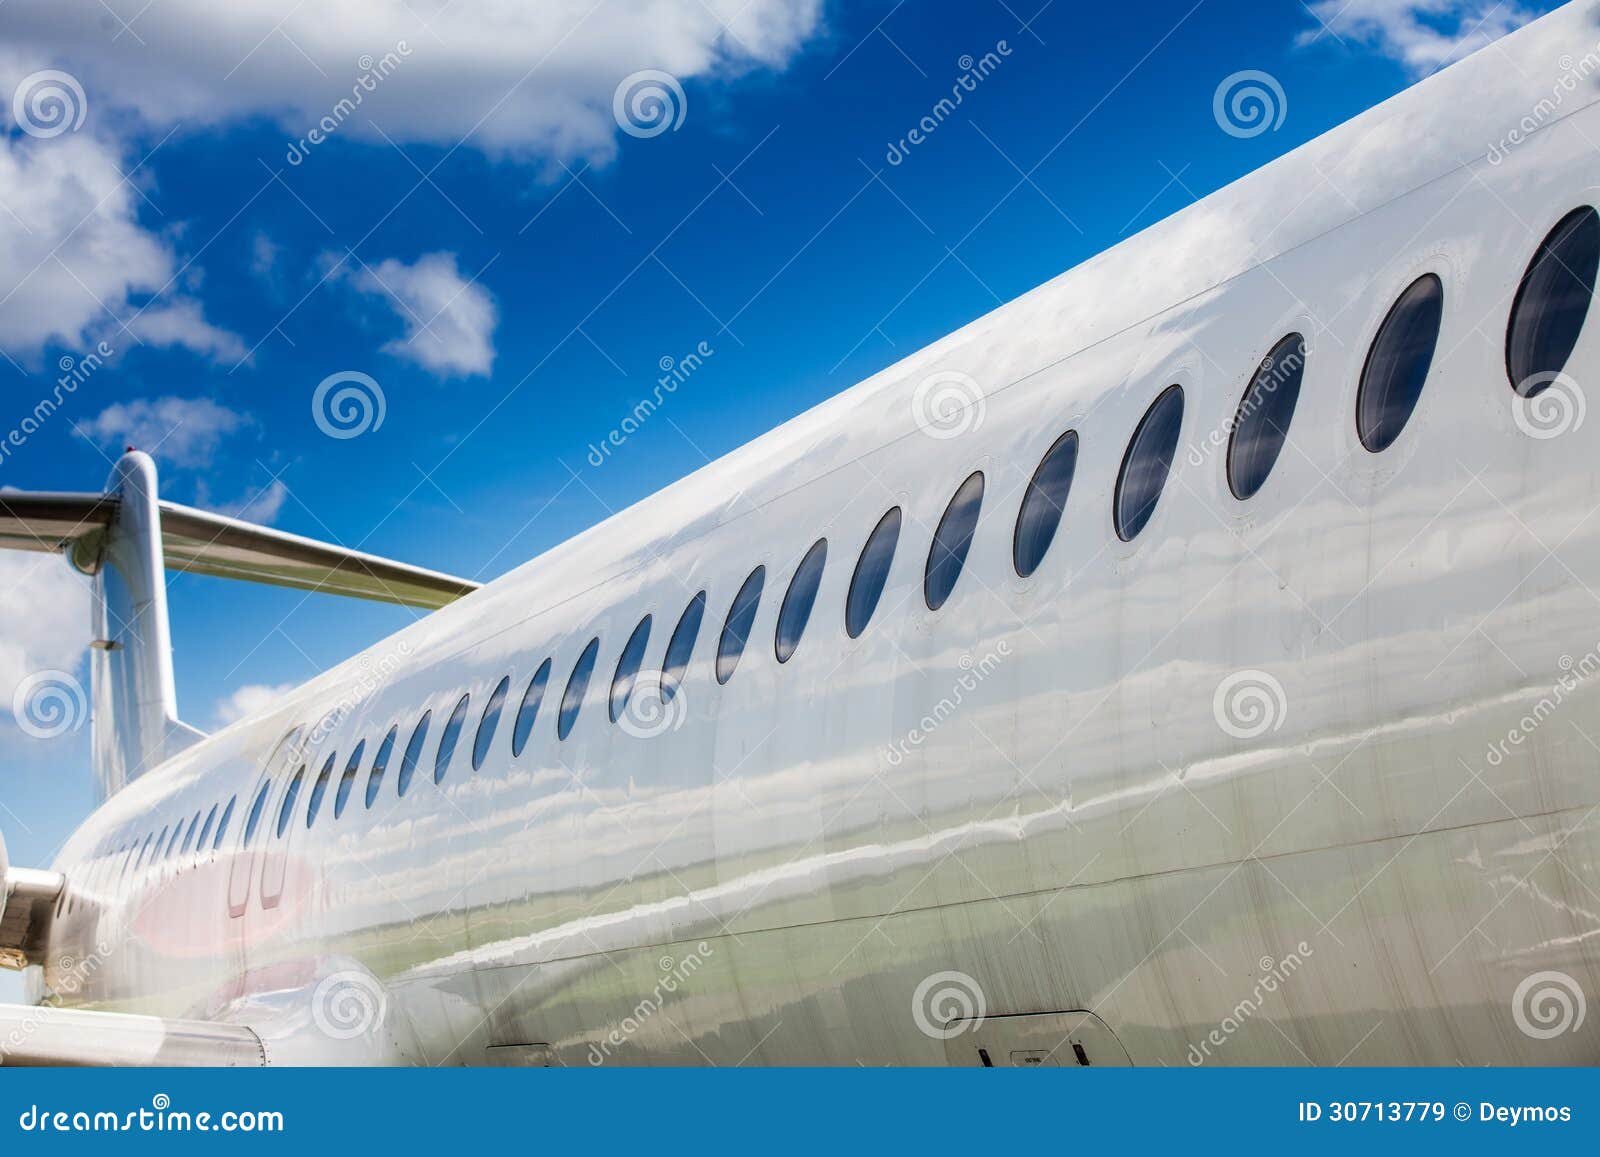 windows and fuselage of a private airplane